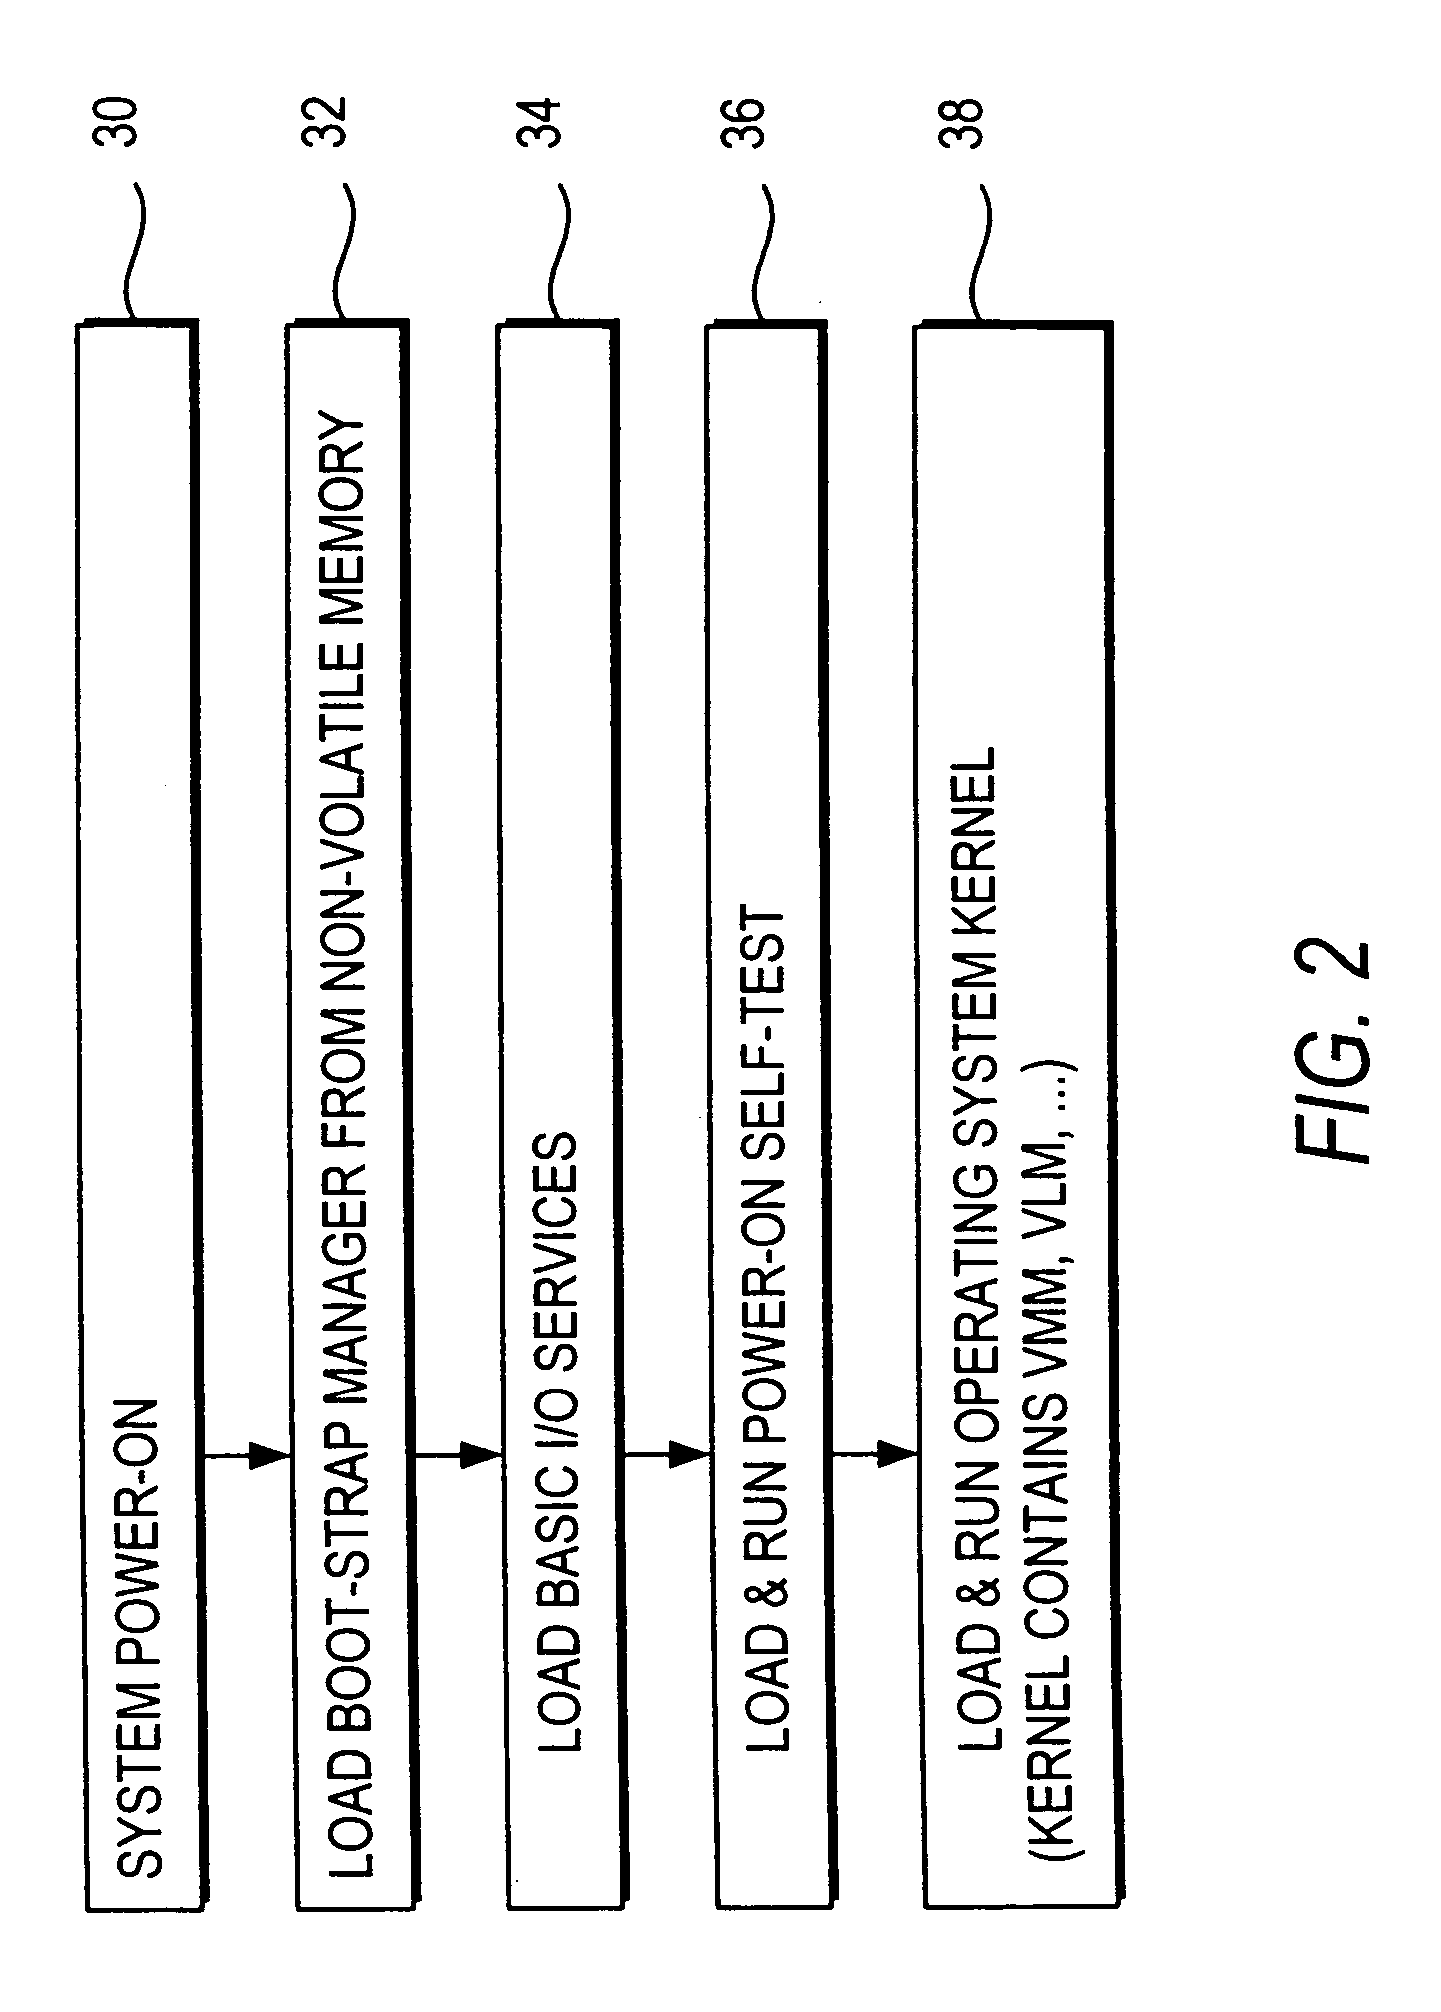 Method for managing resources in a reconfigurable computer having programmable logic resources where automatically swapping configuration data between a secondary storage device and the programmable logic resources